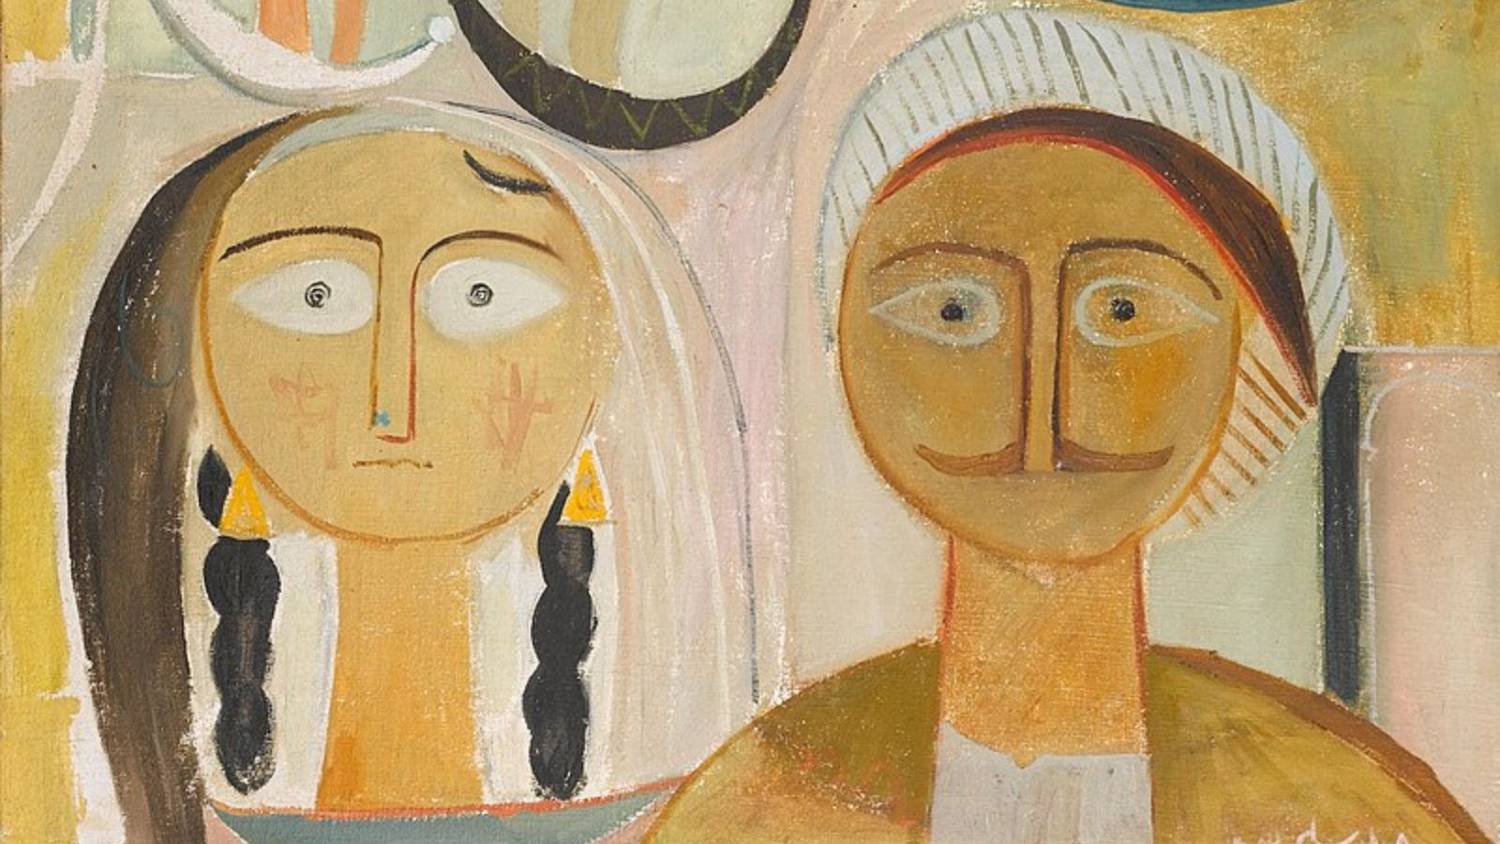 Iraqi artist Jewad Selim was one of the first to pay tribute to Cubism through his own work, like his 1953 piece Young Man and Wife (Public domain)